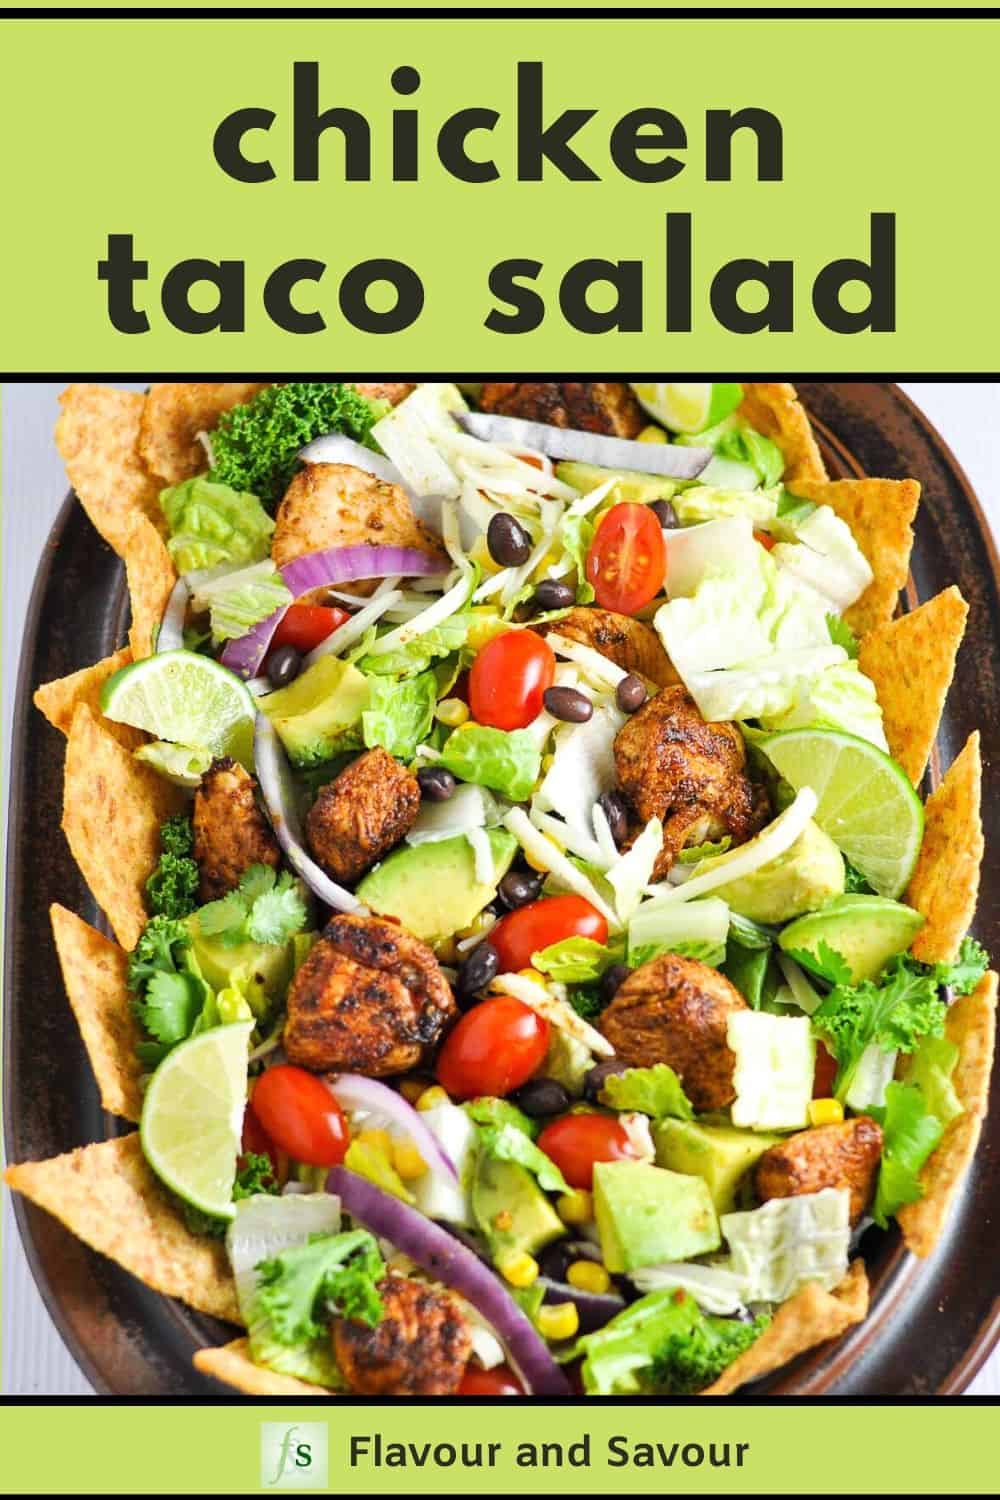 Chopped Chicken Taco Salad with text overlay